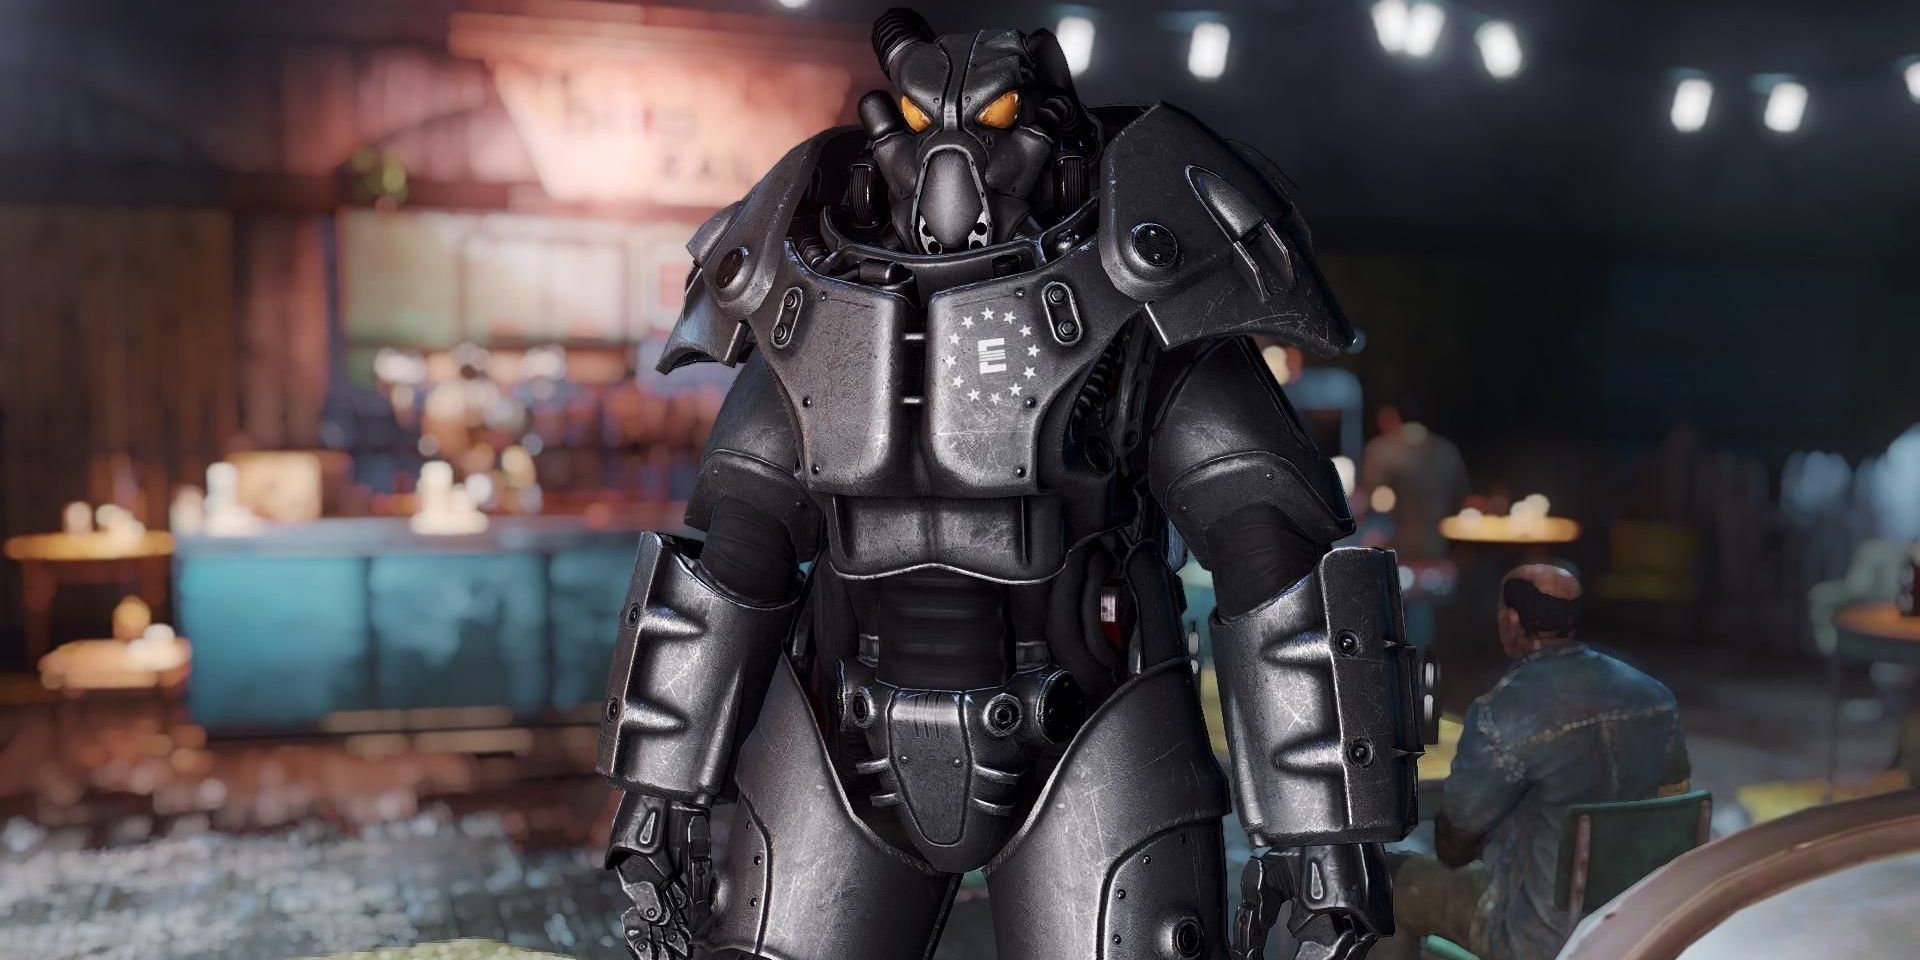 Player wearing menacing, bulky X-01 power armor in Fallout 4.